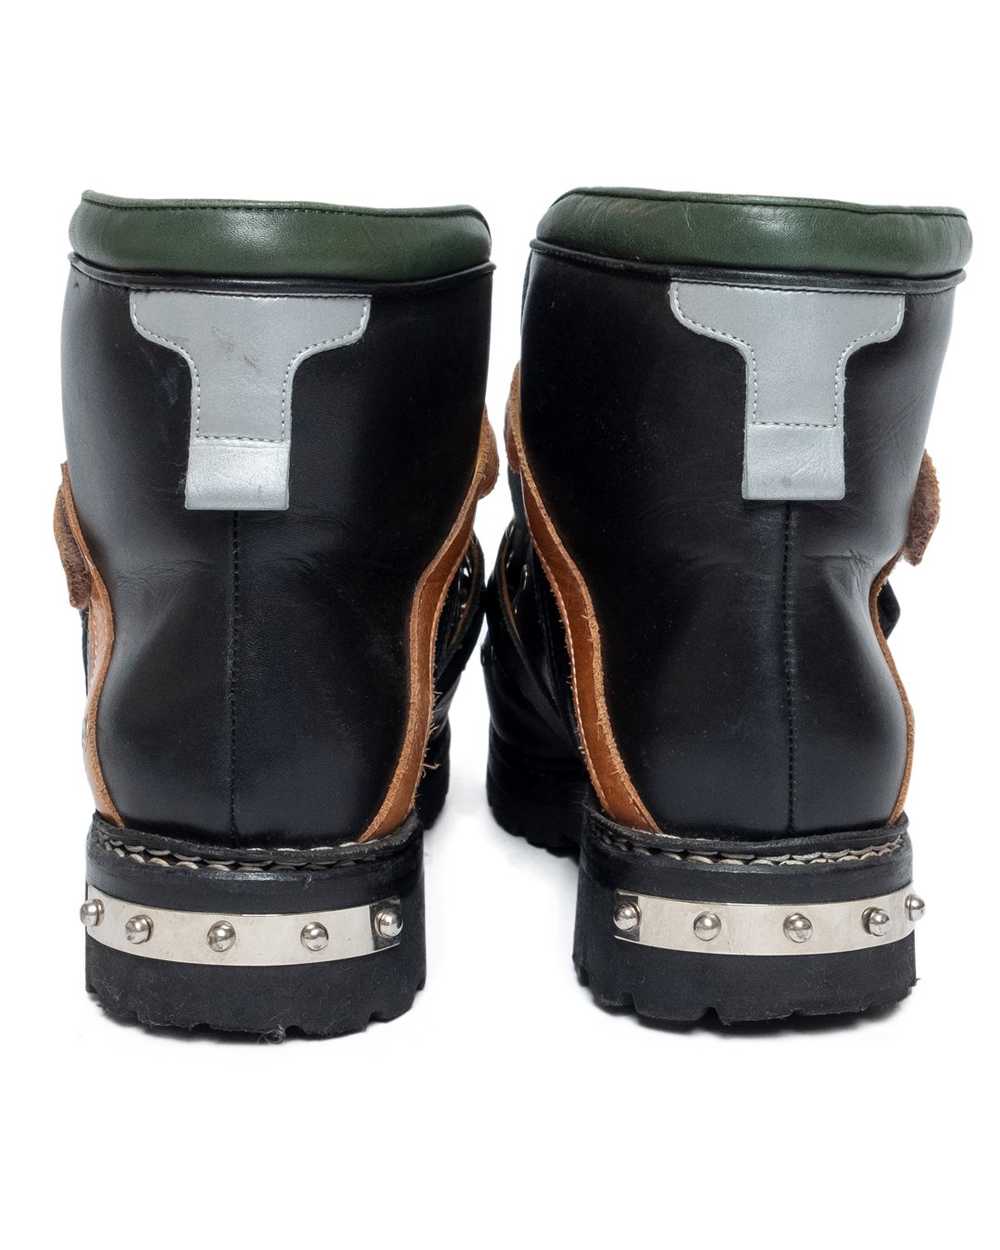 Undercover SS2010 "Less But Better" Hiking Boots - image 4